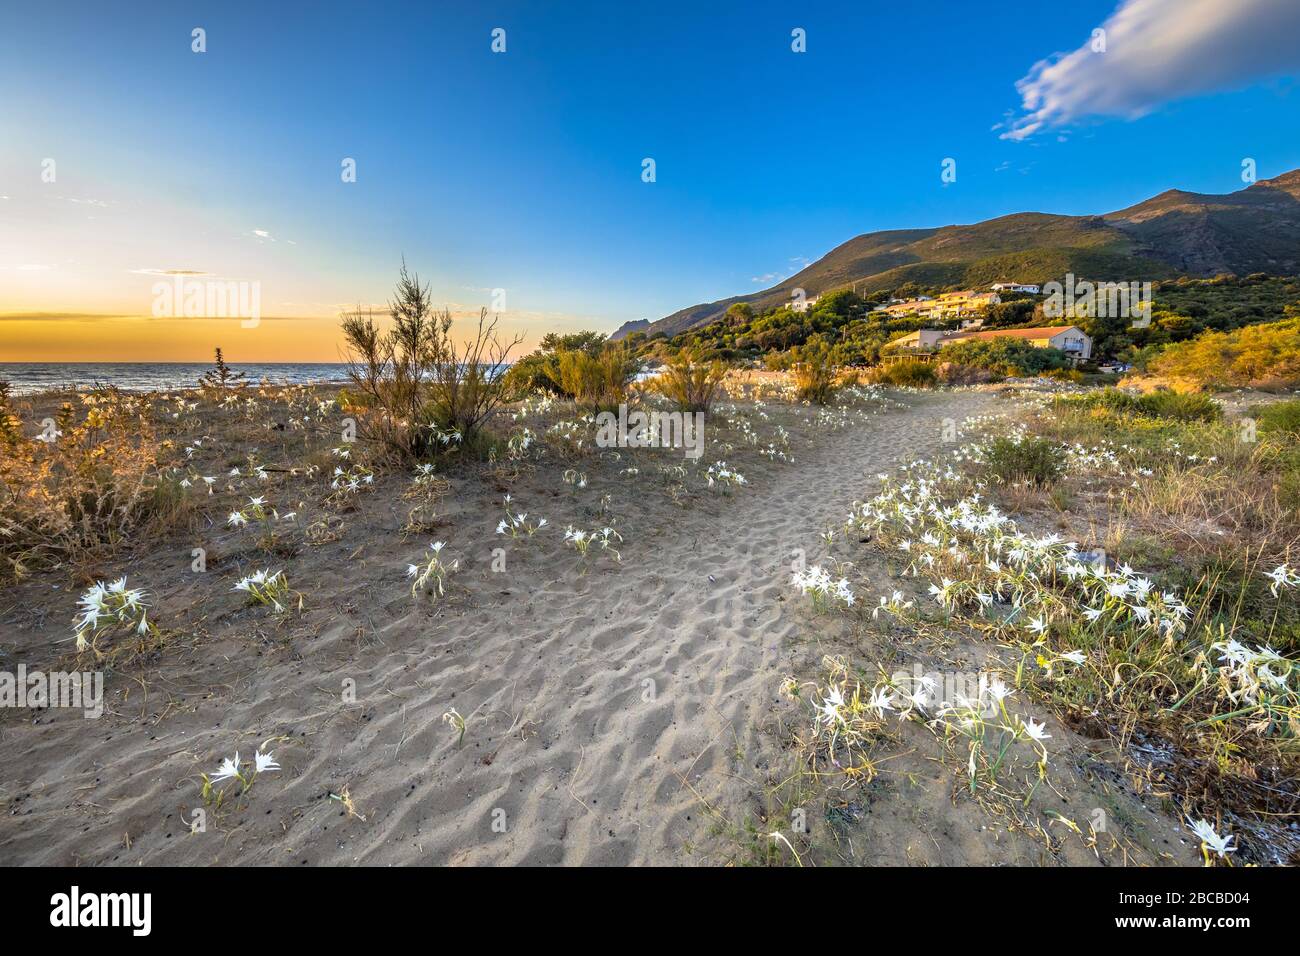 Illyrian sea lily (Pancratium illyricum) white flowers blooming in dunes on Corsican beach of Farinole on Cap Corse, Corsica, France Stock Photo